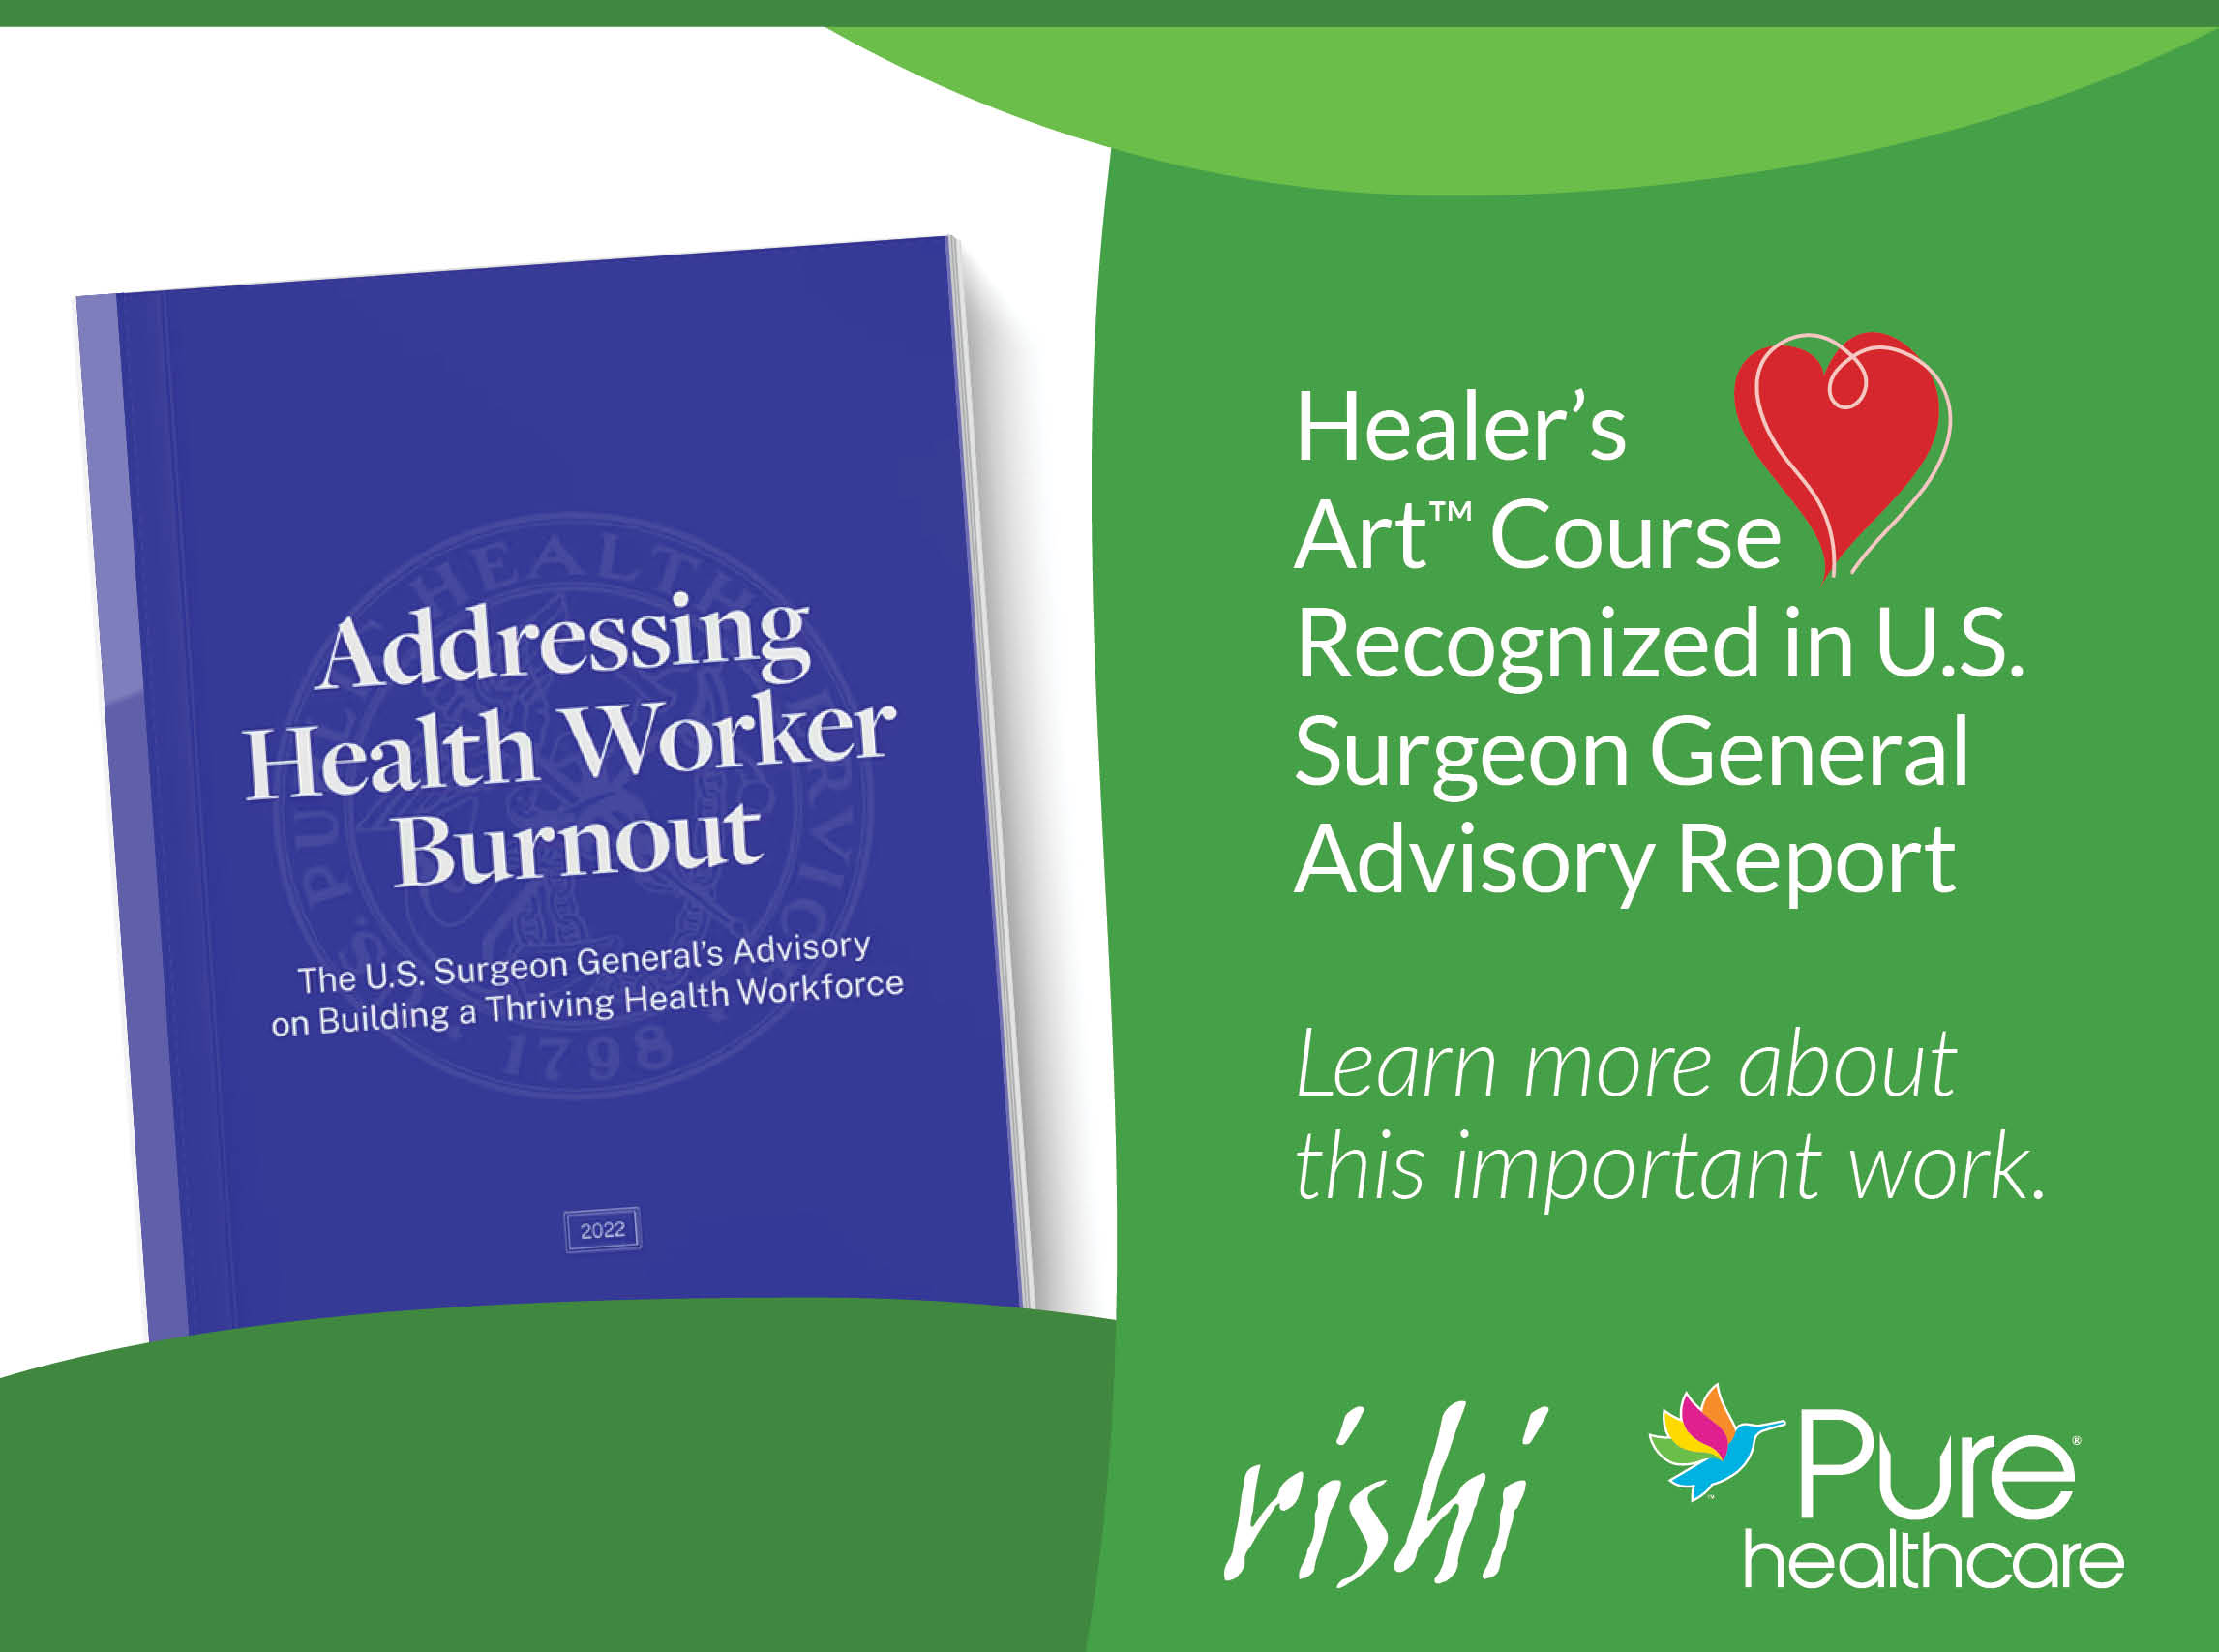 Healer's Art Course Recognized in US Surgeon General Advisory Report - RISHI at Pure Healthcare